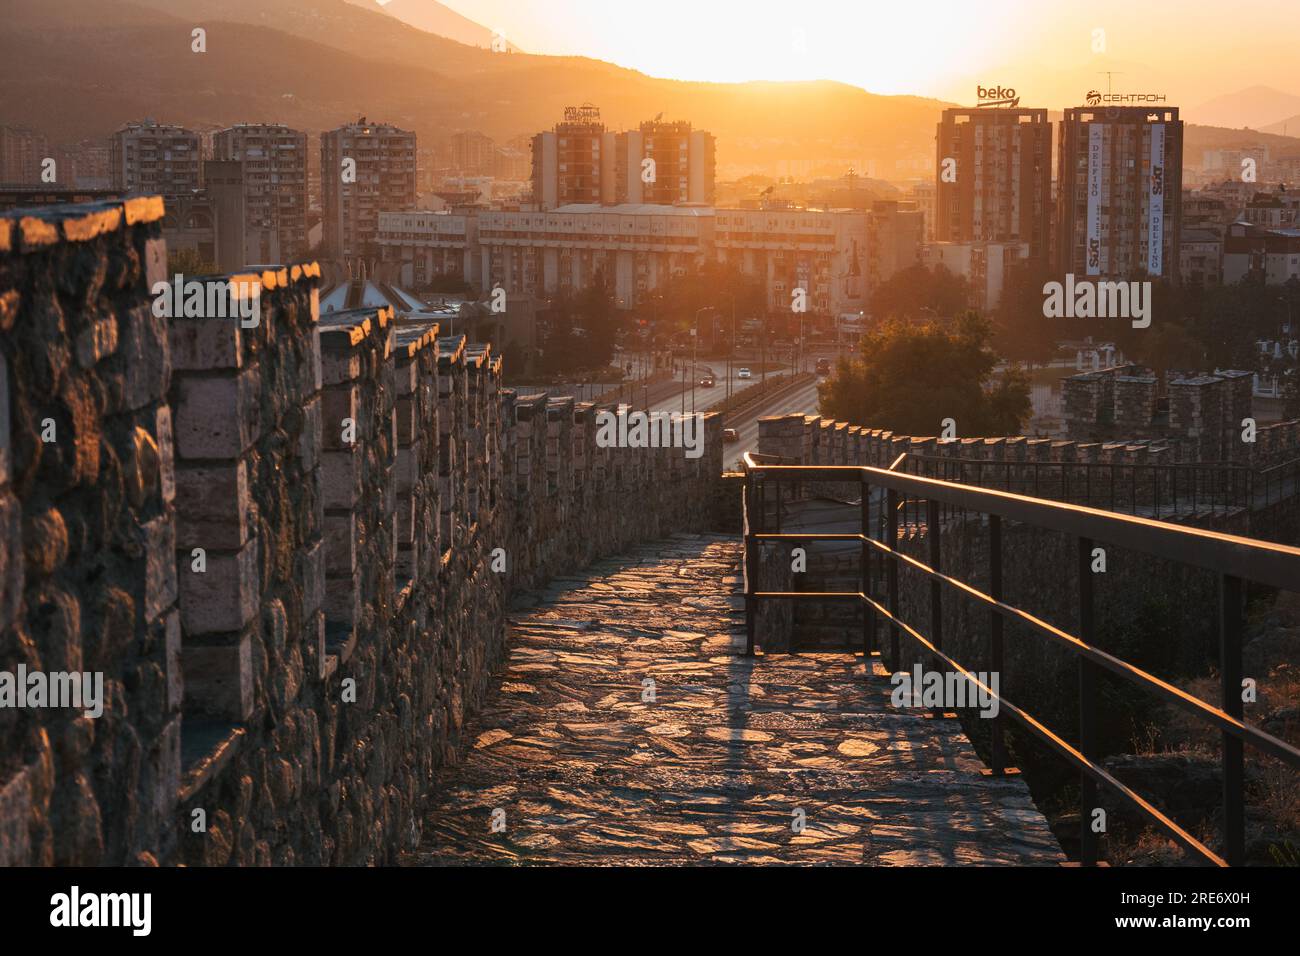 Sun sets on stone walls at Kale Fortress, Skopje, North Macedonia. The fort's history dates back to 6th century CE. Stock Photo